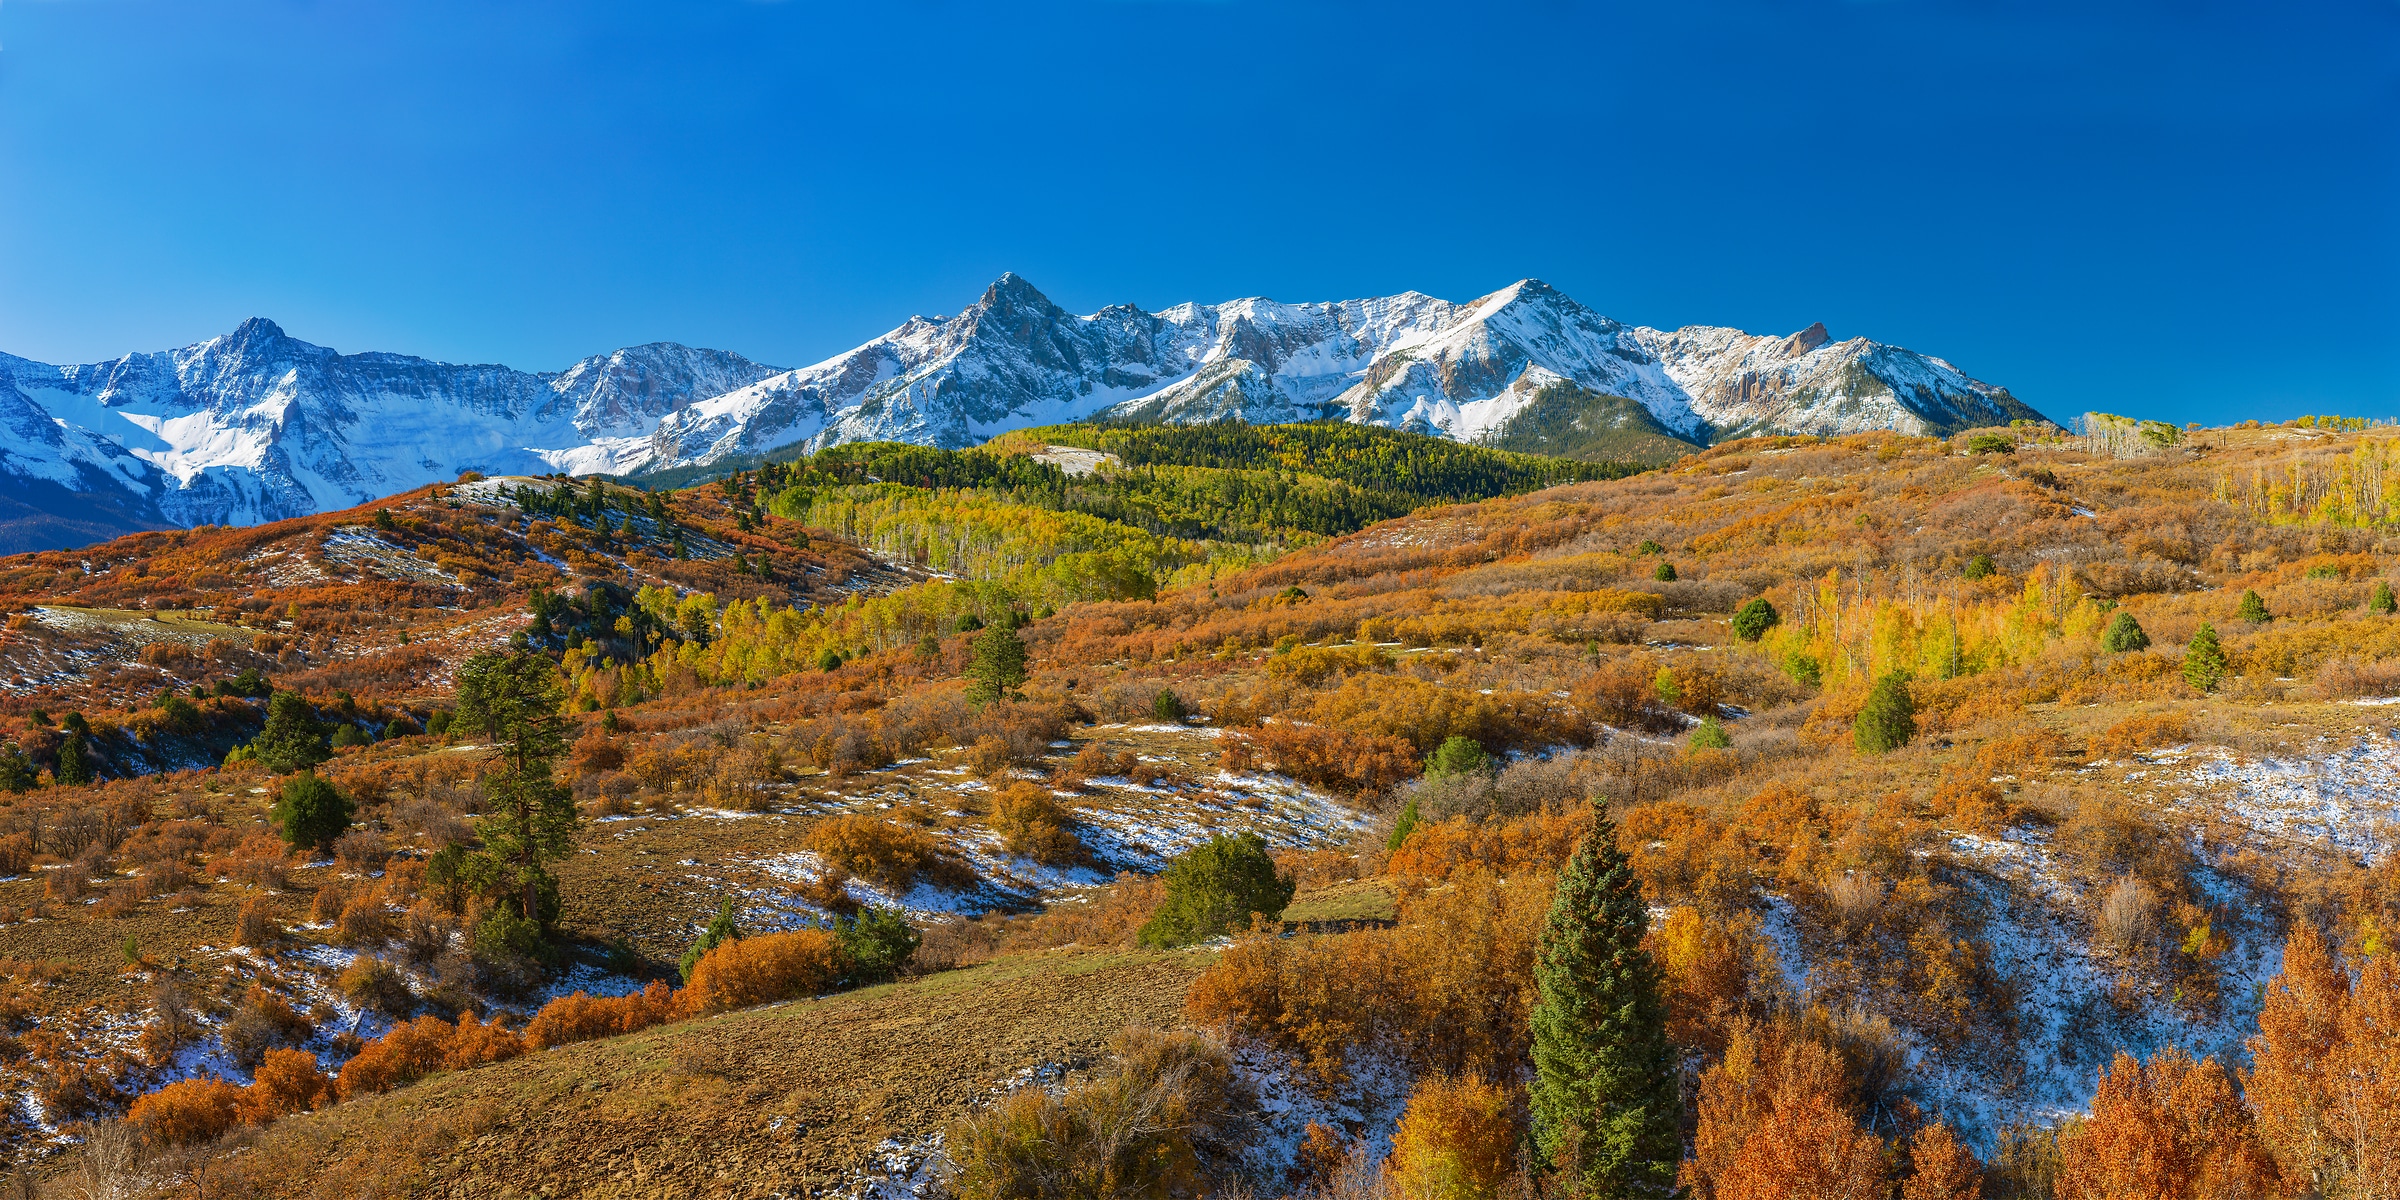 421 megapixels! A very high resolution, large-format VAST photo print of the Dallas Divide mountains in fall with snow and autumn foliage; landscape photograph created by John Freeman in Dallas Divide Overlook, Ridgeway, Colorado.